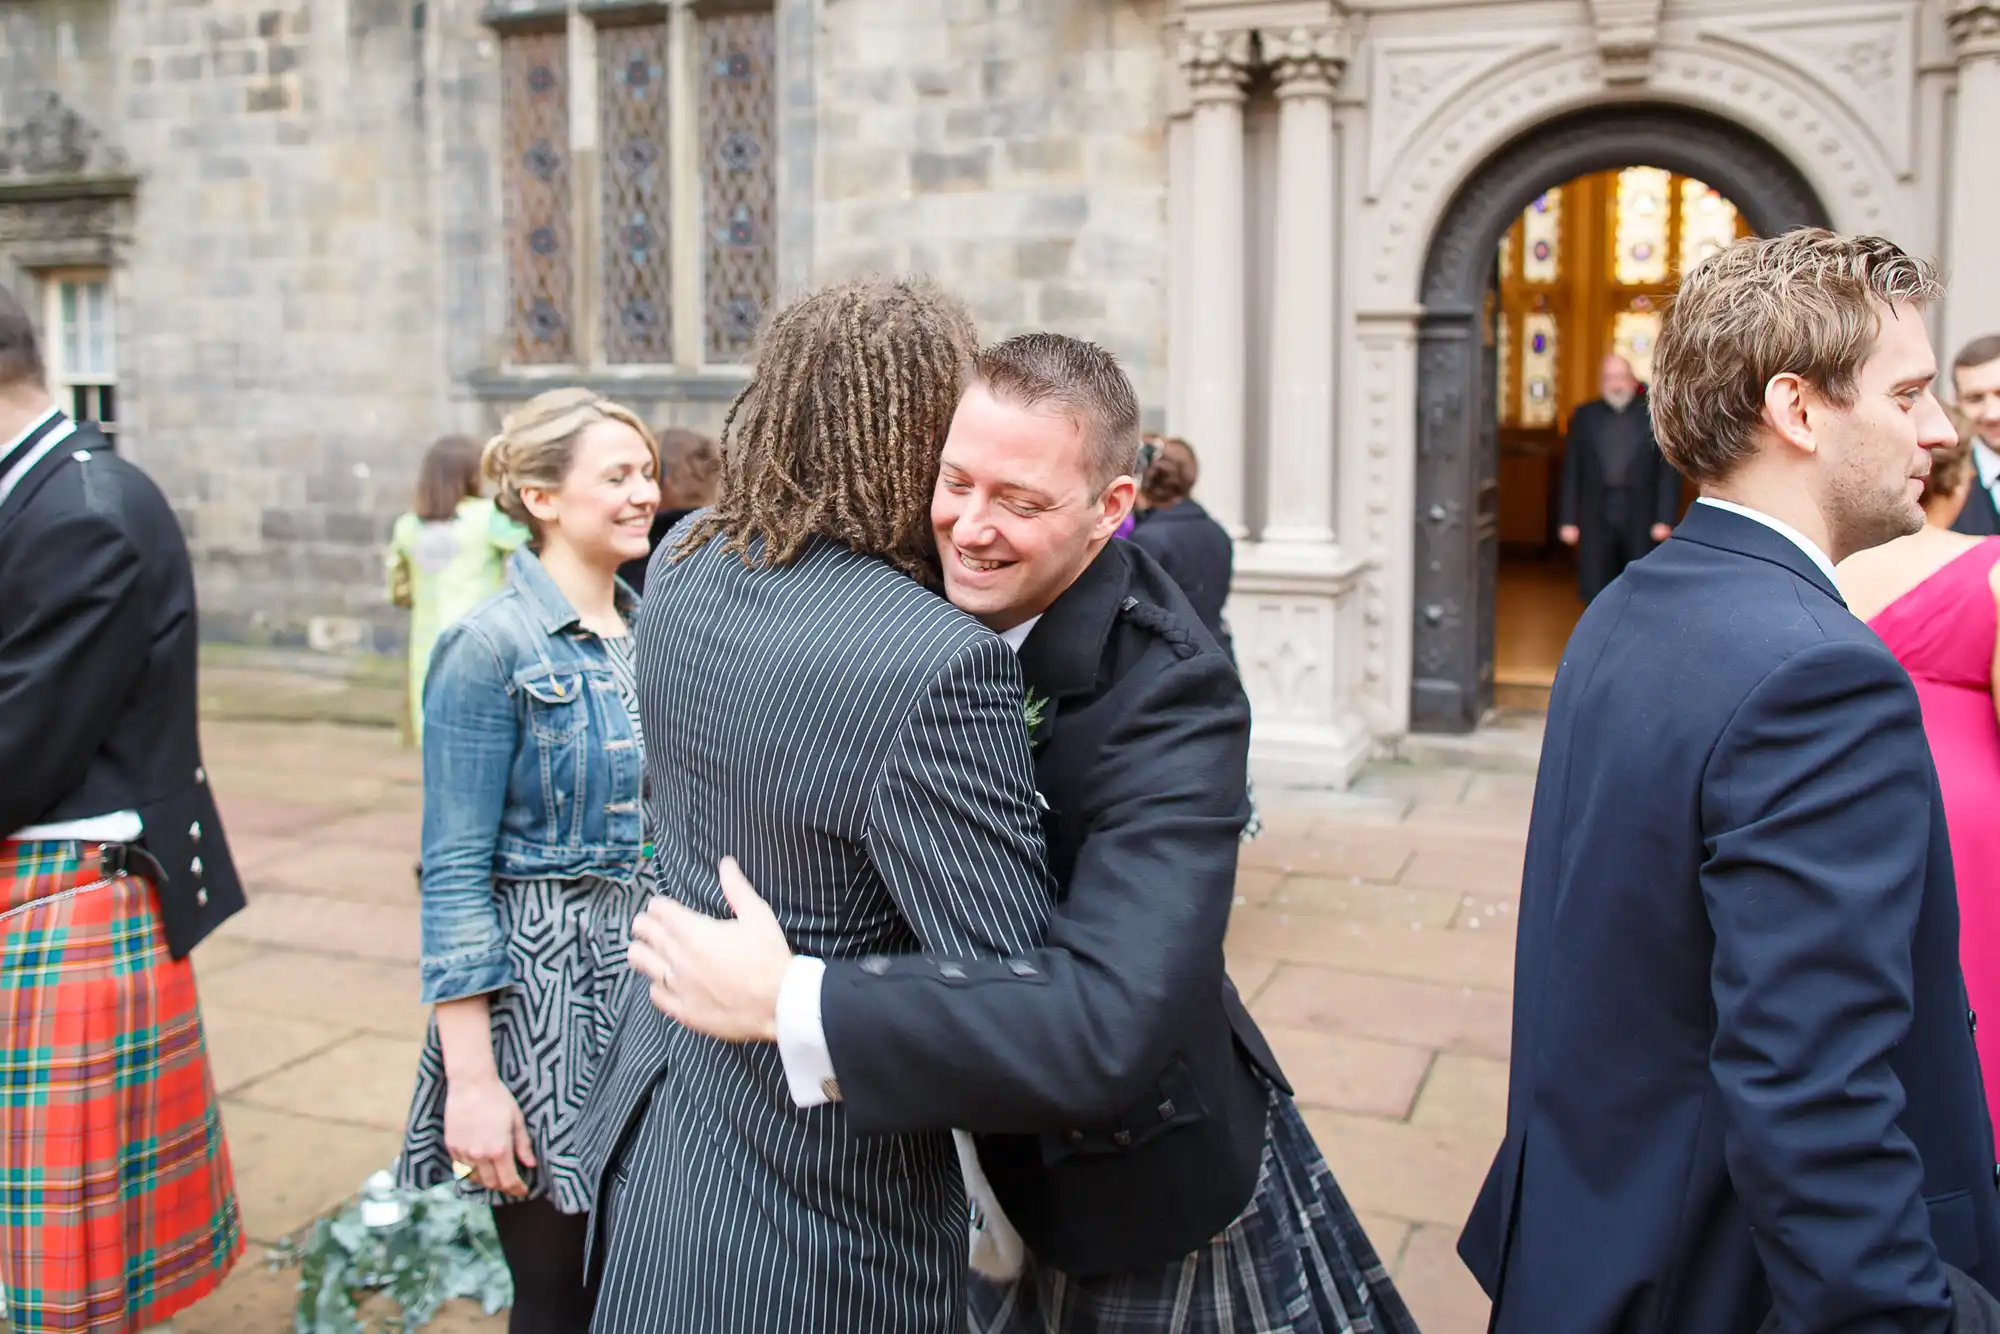 Two men embracing warmly outside a church, one in a striped suit and the other in a formal jacket, with guests in kilts and dresses nearby.